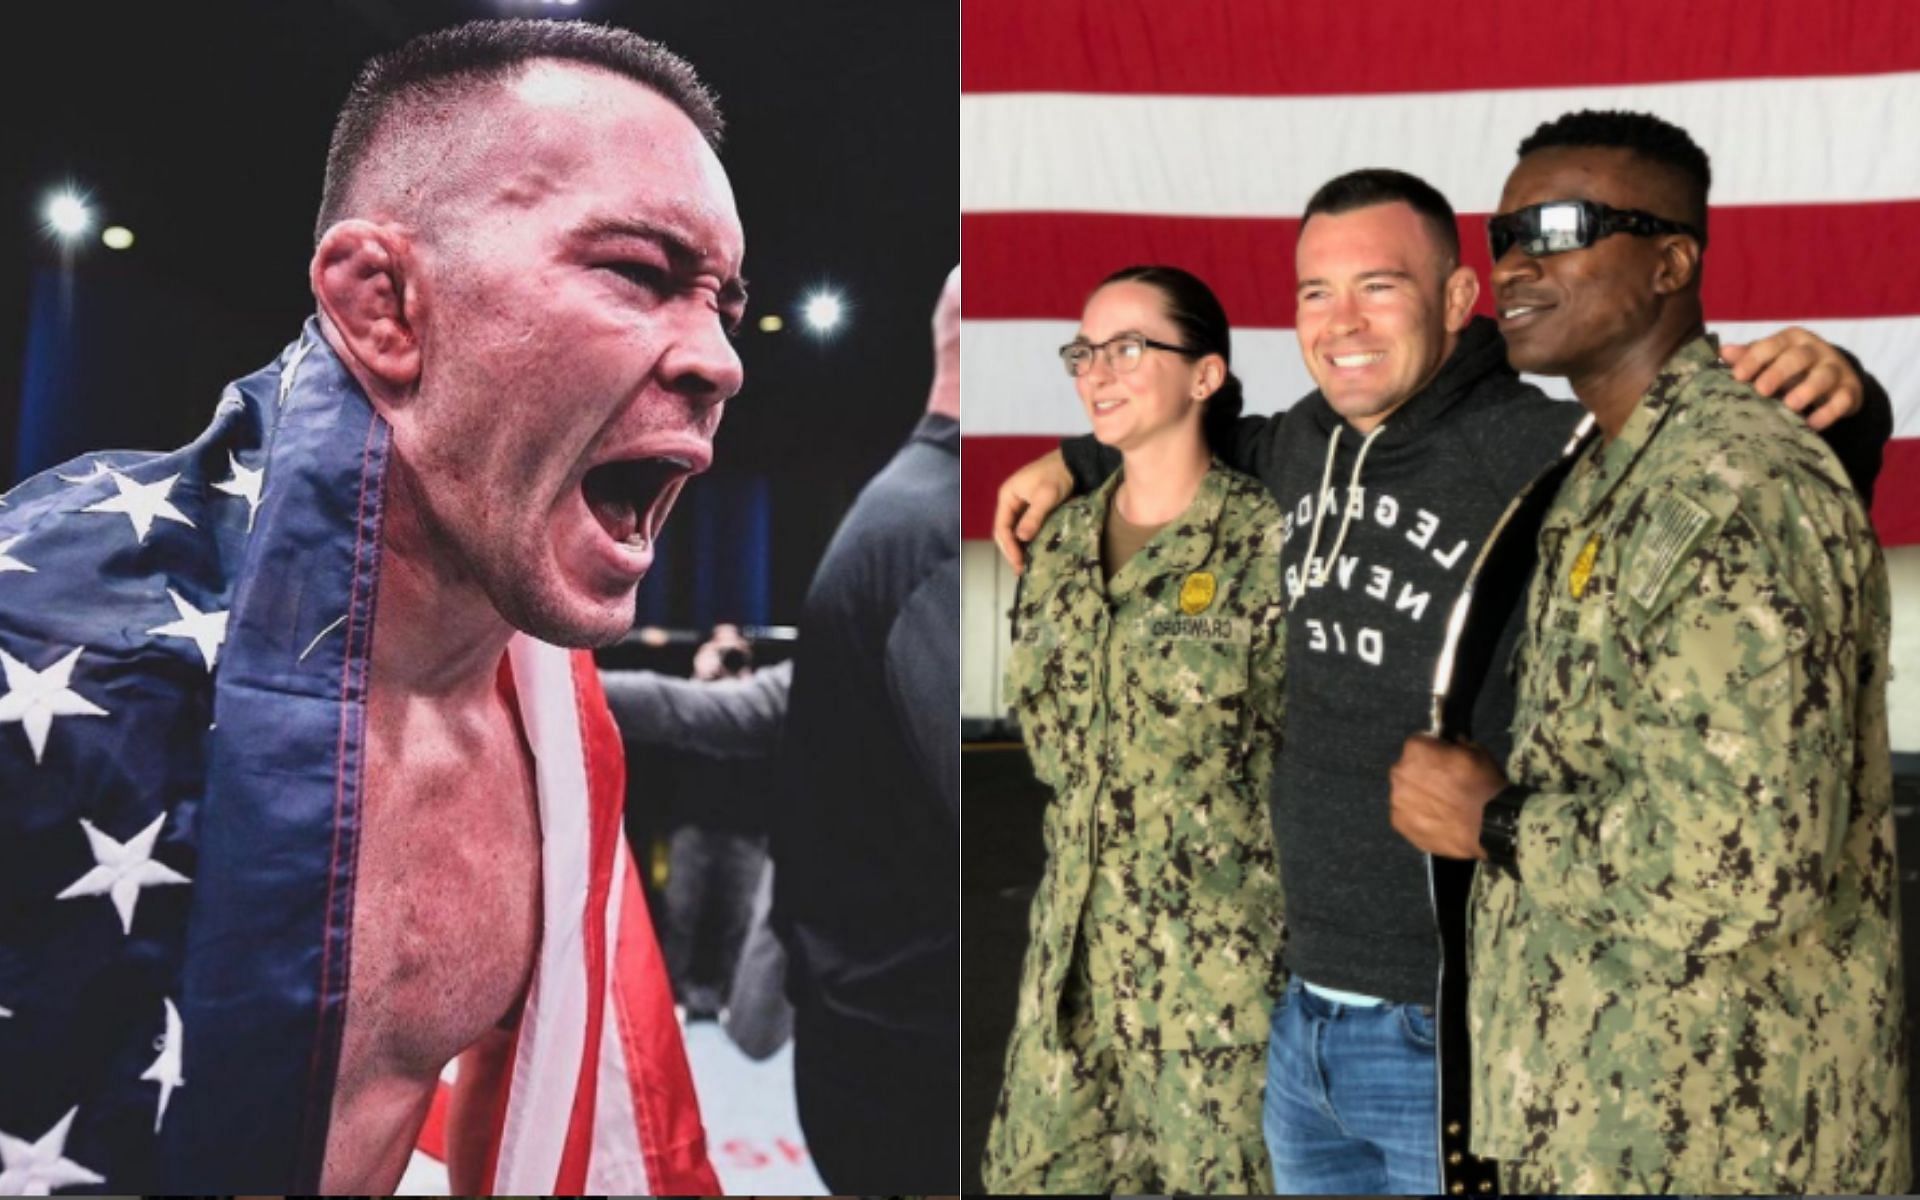 Colby Covington competes in the UFC [Image credits: @colbycovmma on Instagram]